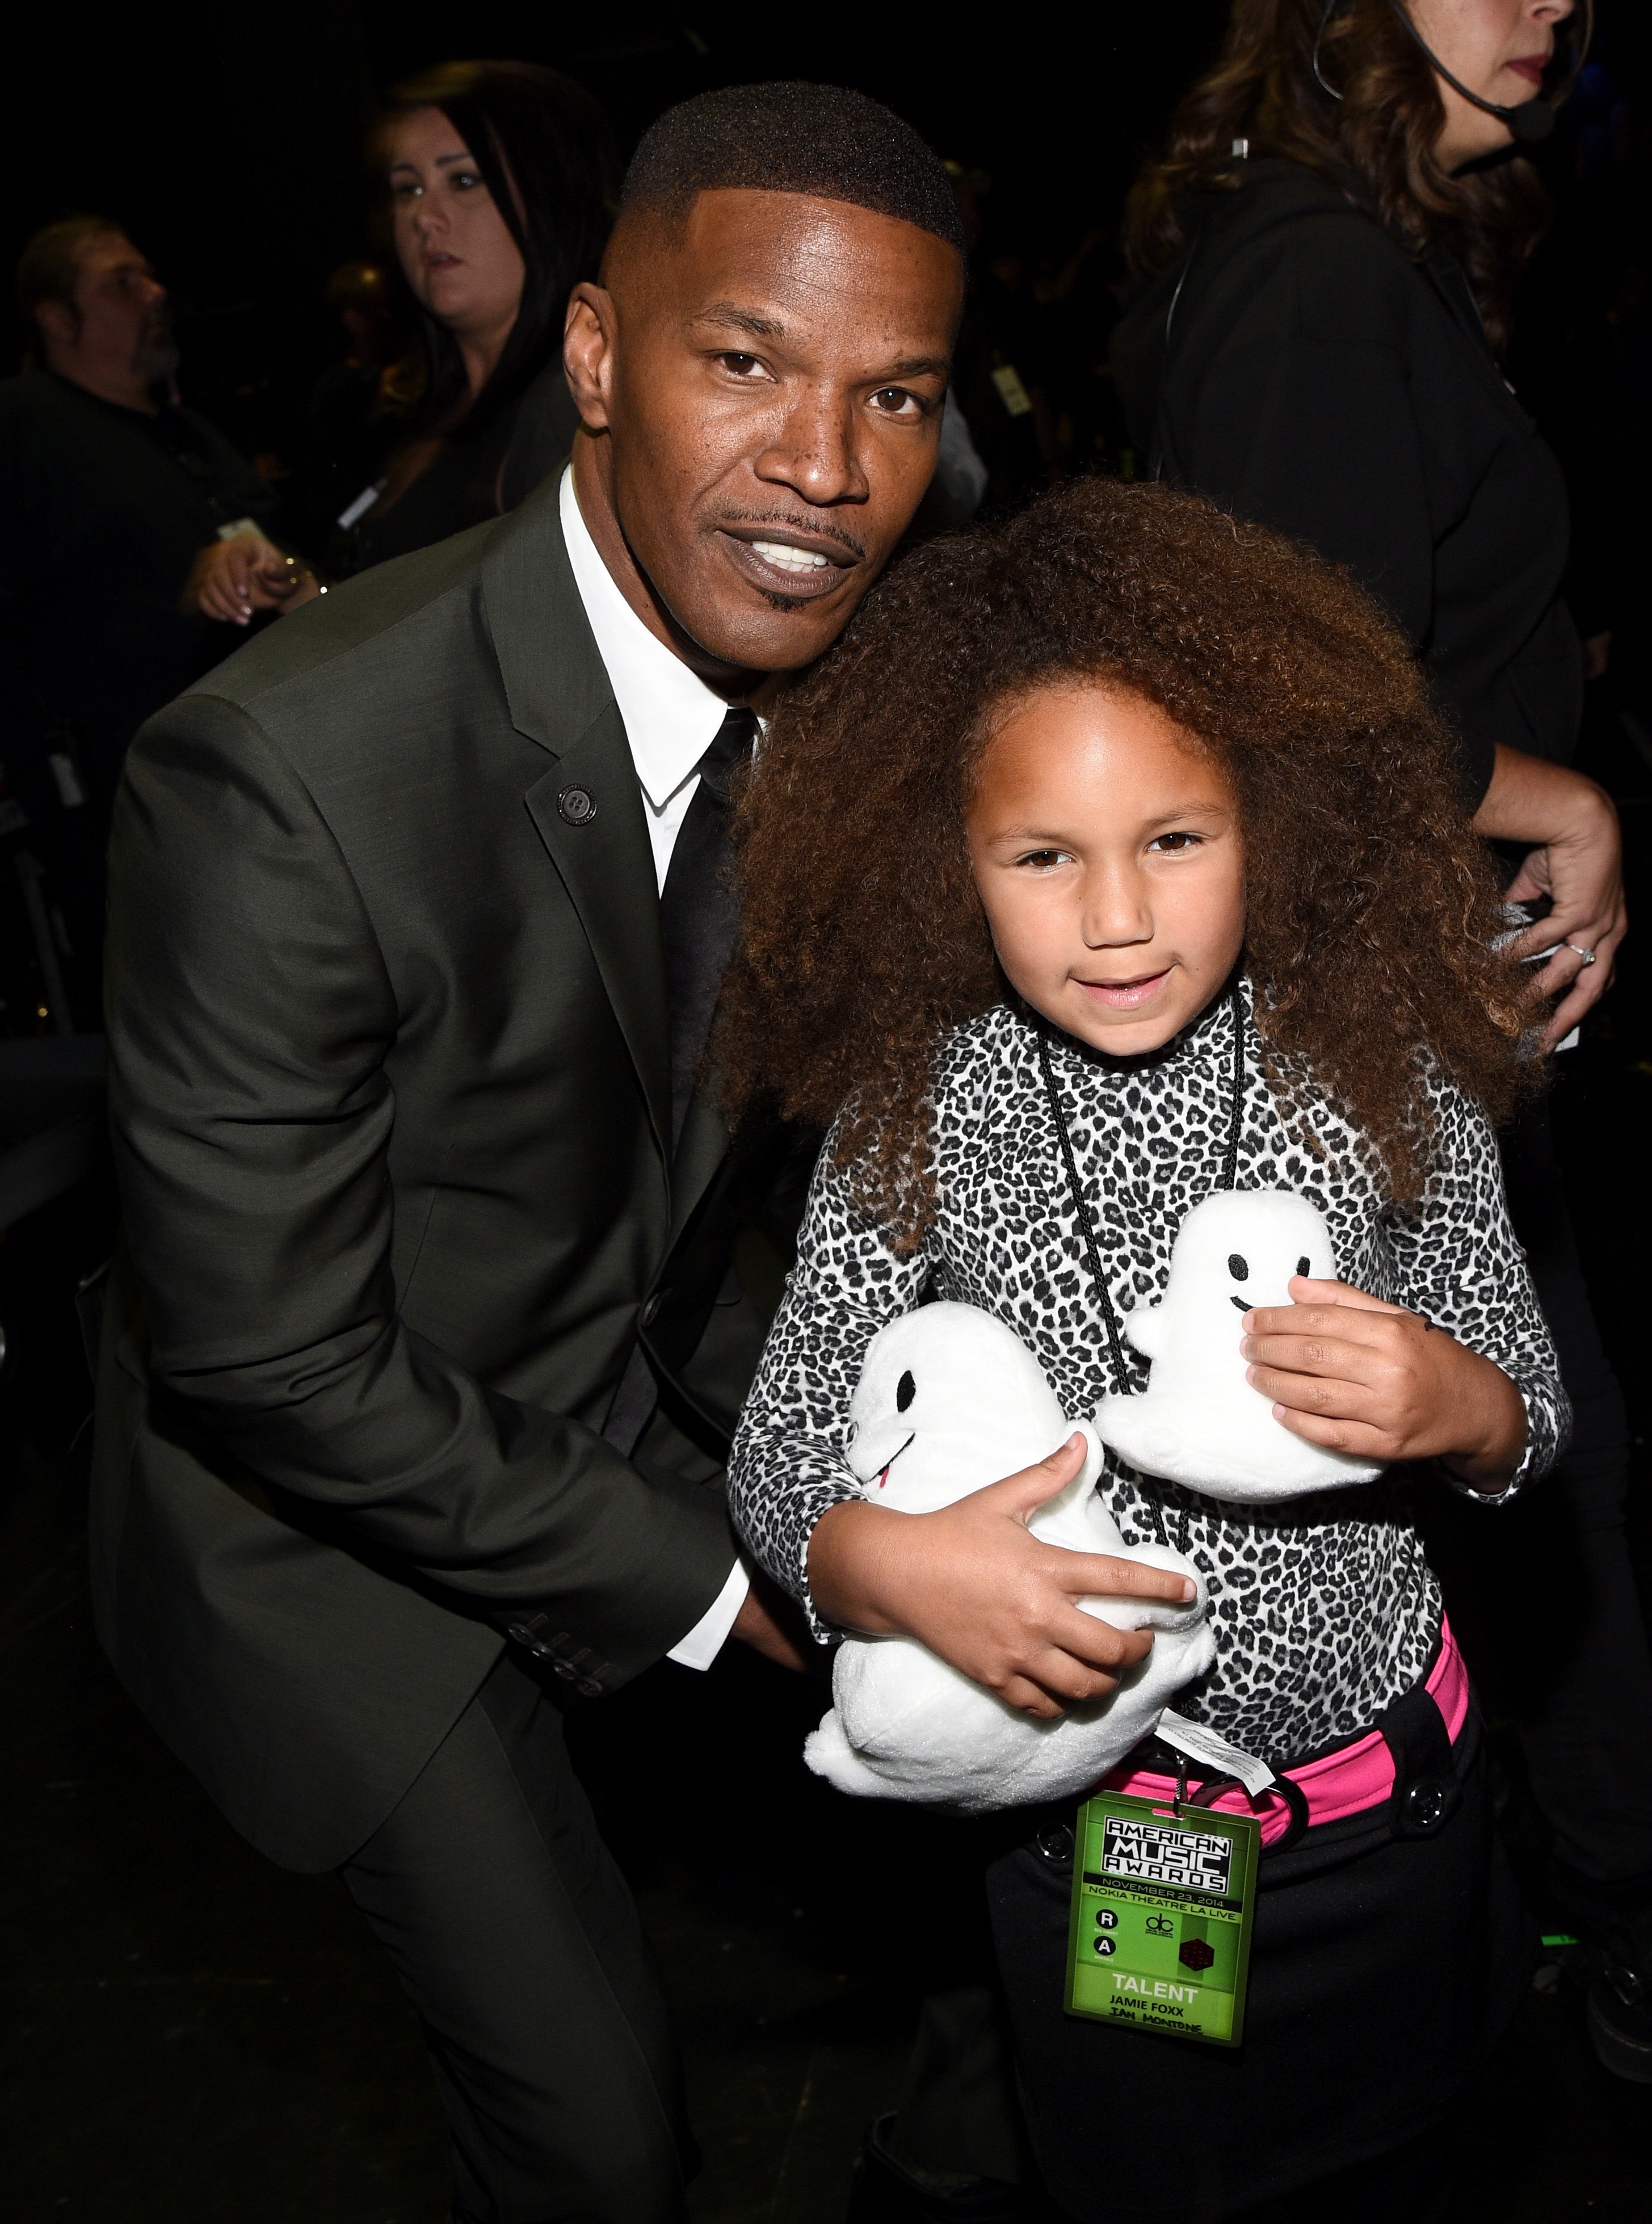 Jamie Foxx Tells His Daughters to Not Take the ‘Back Seat’ for Any Guy: ‘Get Your Career, Do Your Thing’